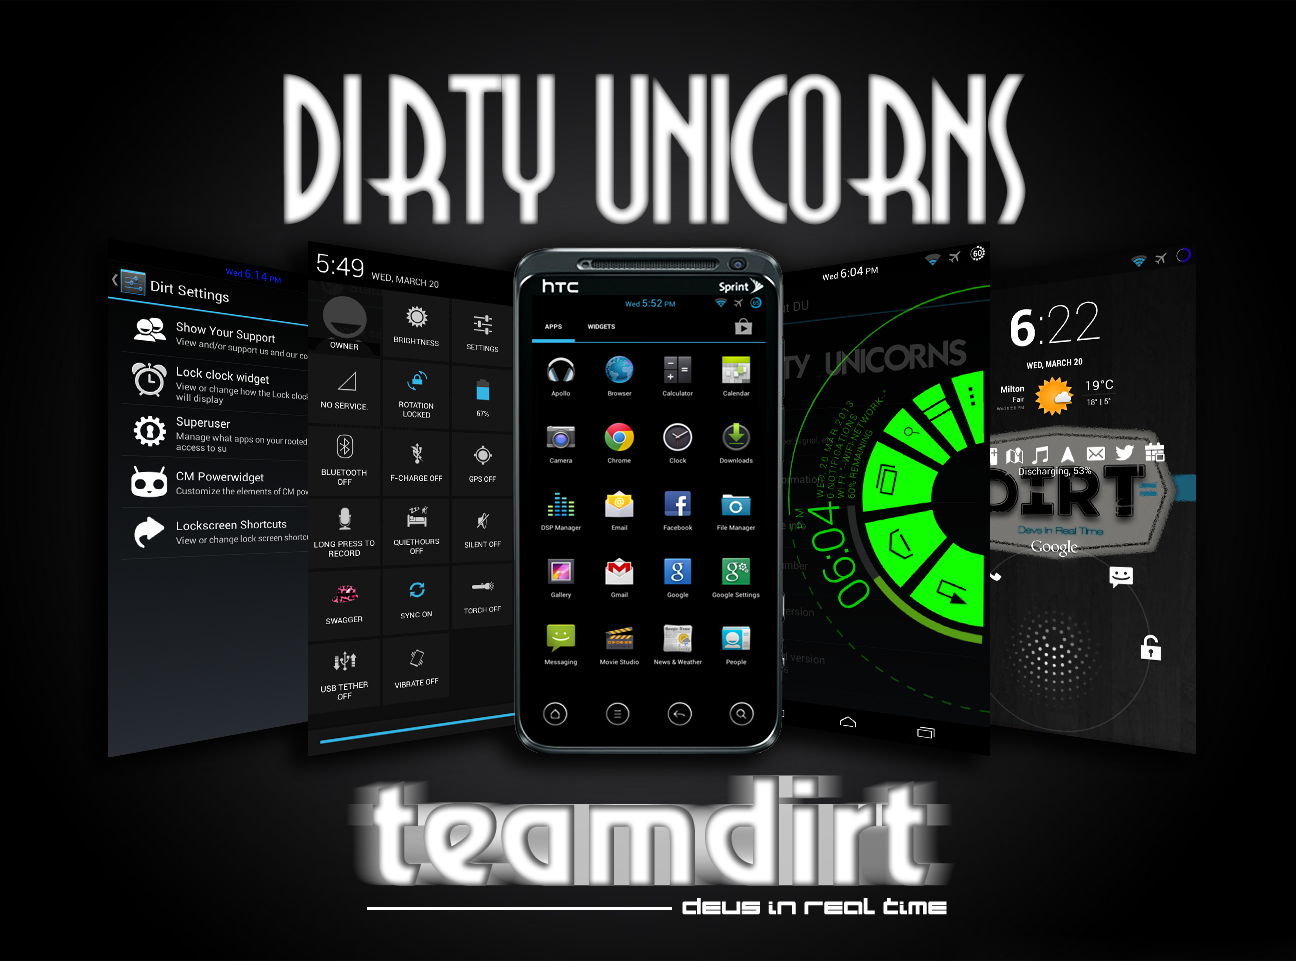 Dirty Unicorns by teamdirt (devs in real time)